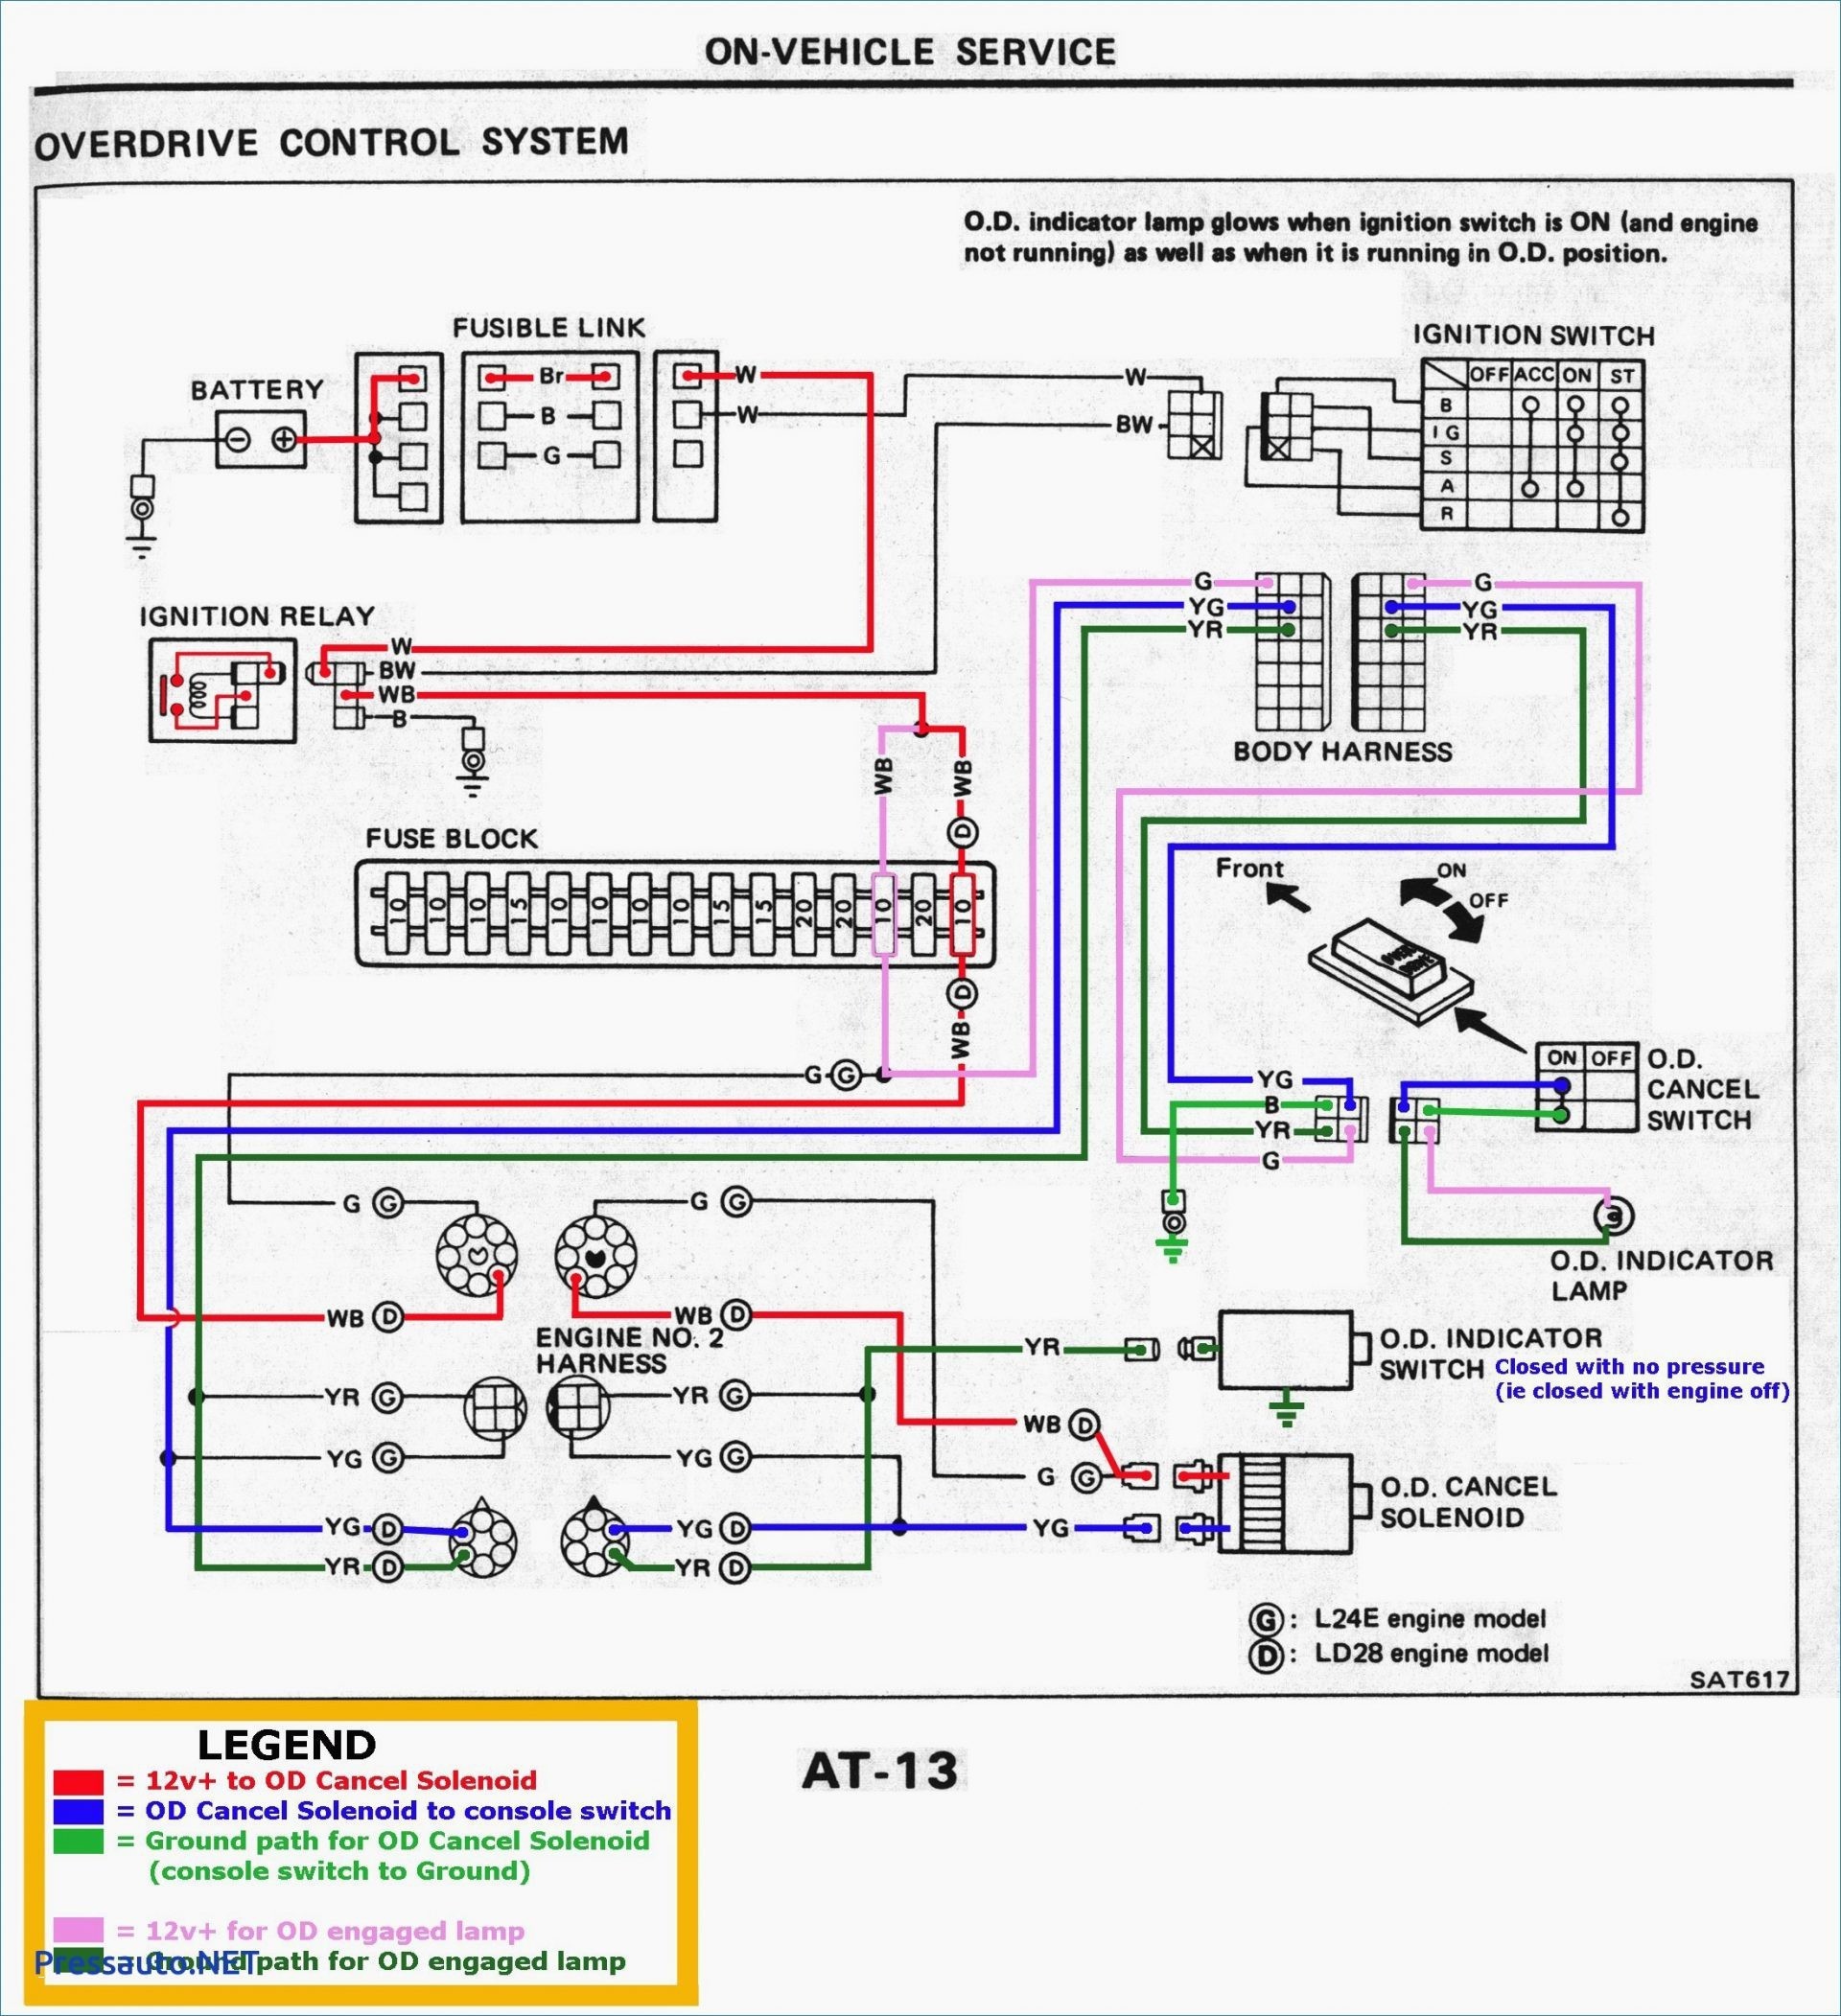 Wiring Diagram for Horse Trailer Plug Save ford F150 Trailer Wiring Harness Diagram – Banksbankingfo –